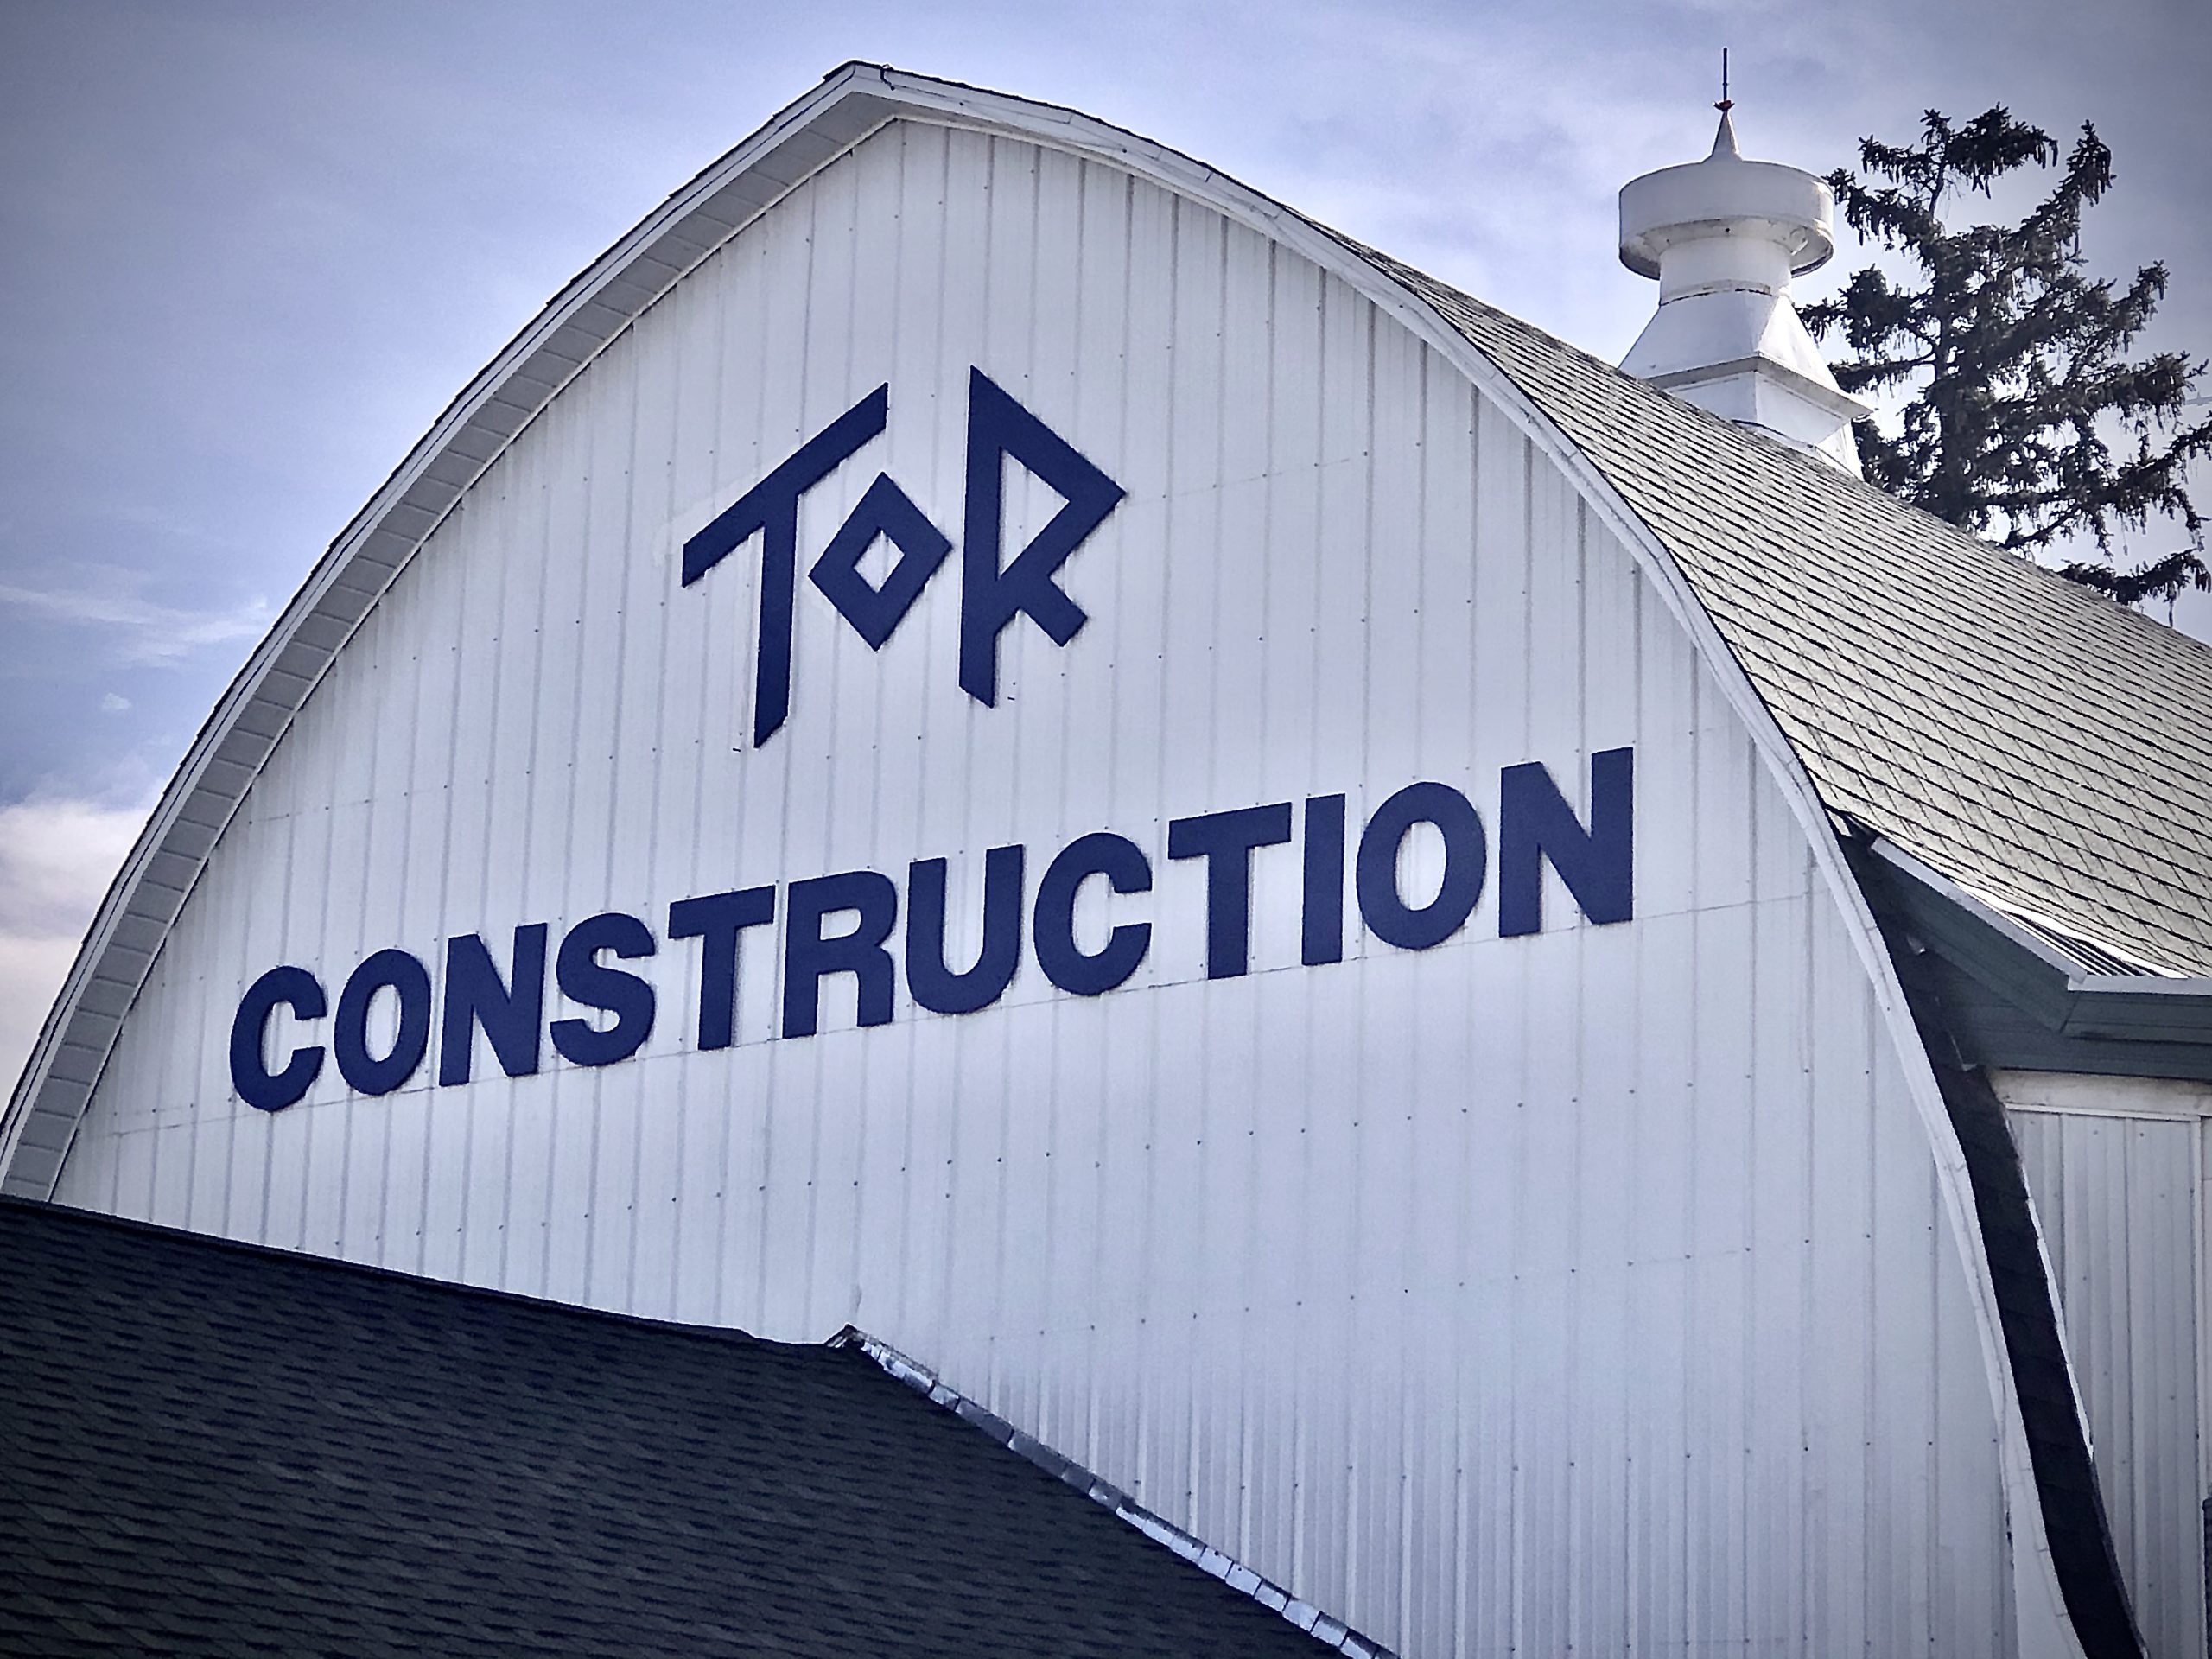 Tor construction building